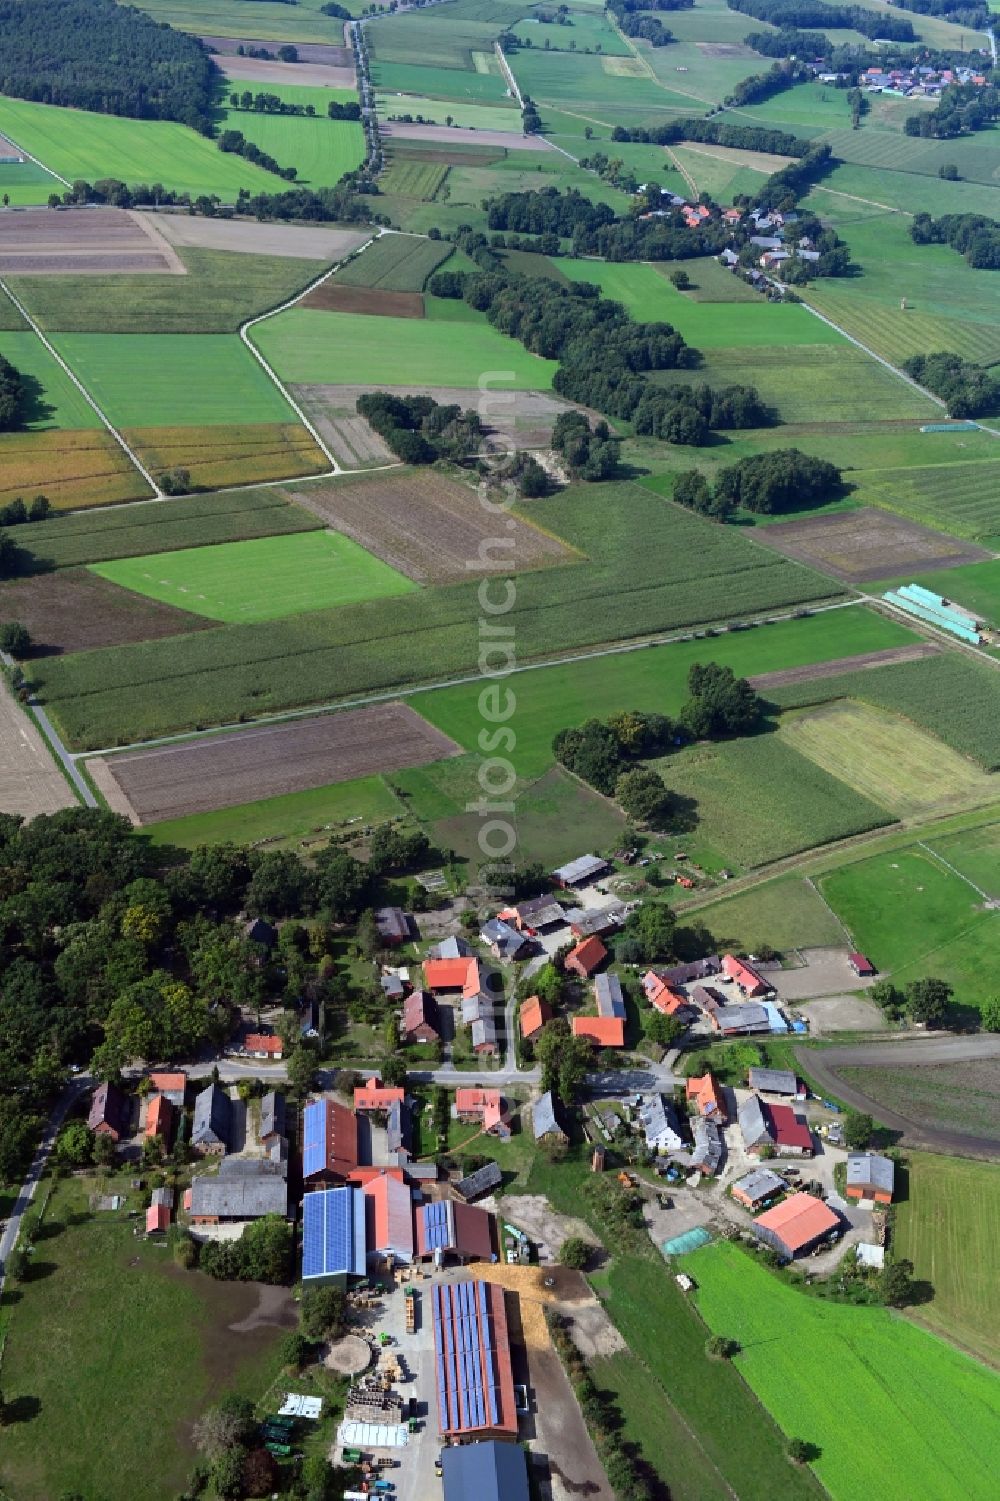 Teichlosen from above - Village - view on the edge of agricultural fields and farmland in Teichlosen in the state Lower Saxony, Germany